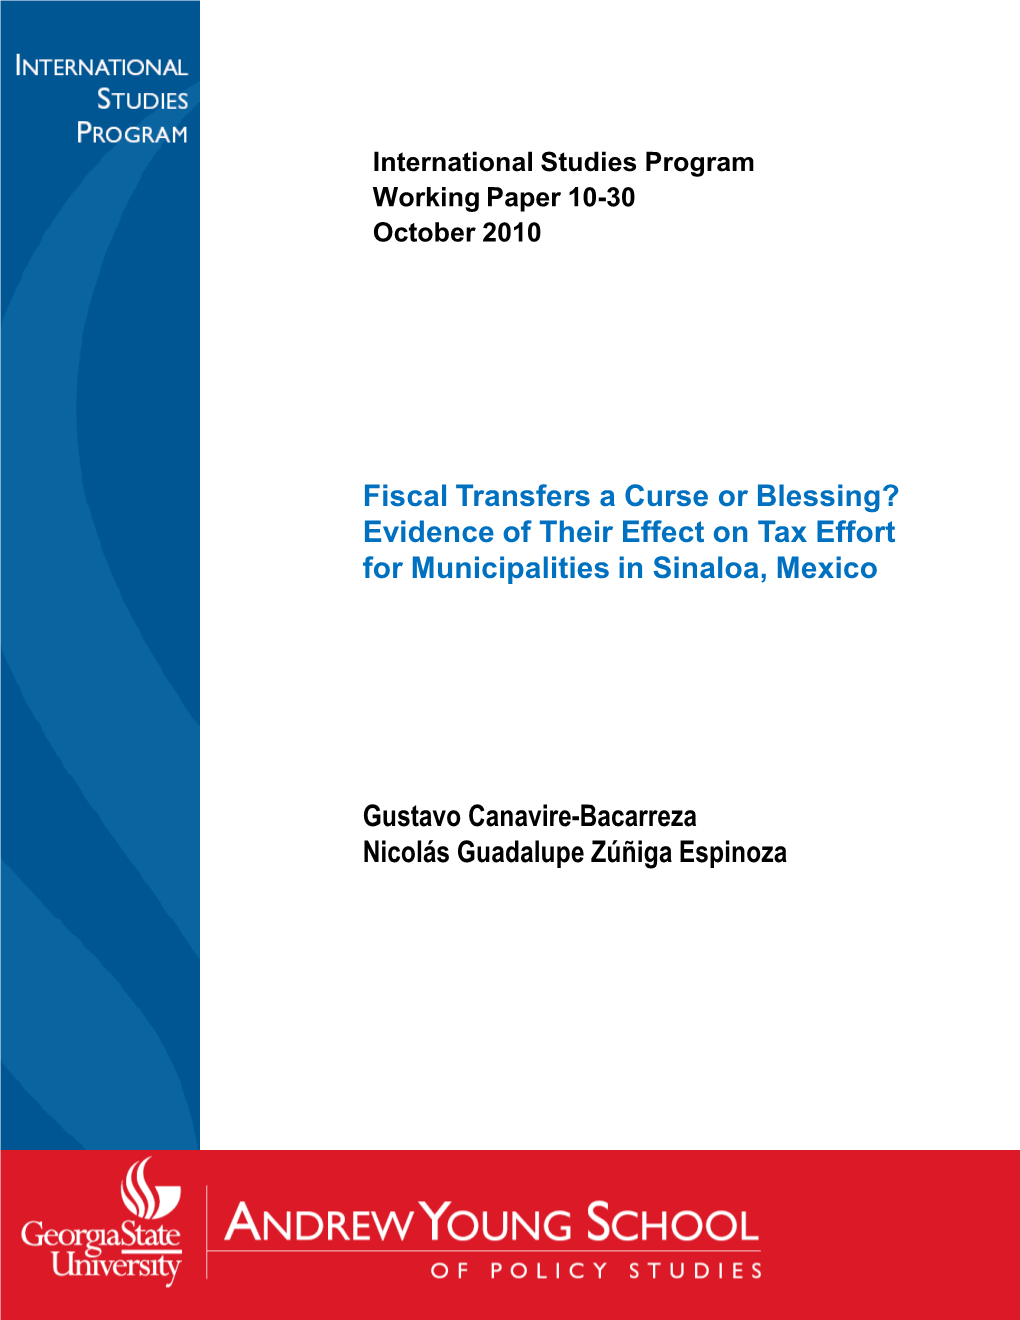 Fiscal Transfers a Curse Or Blessing? Evidence of Their Effect on Tax Effort for Municipalities in Sinaloa, Mexico